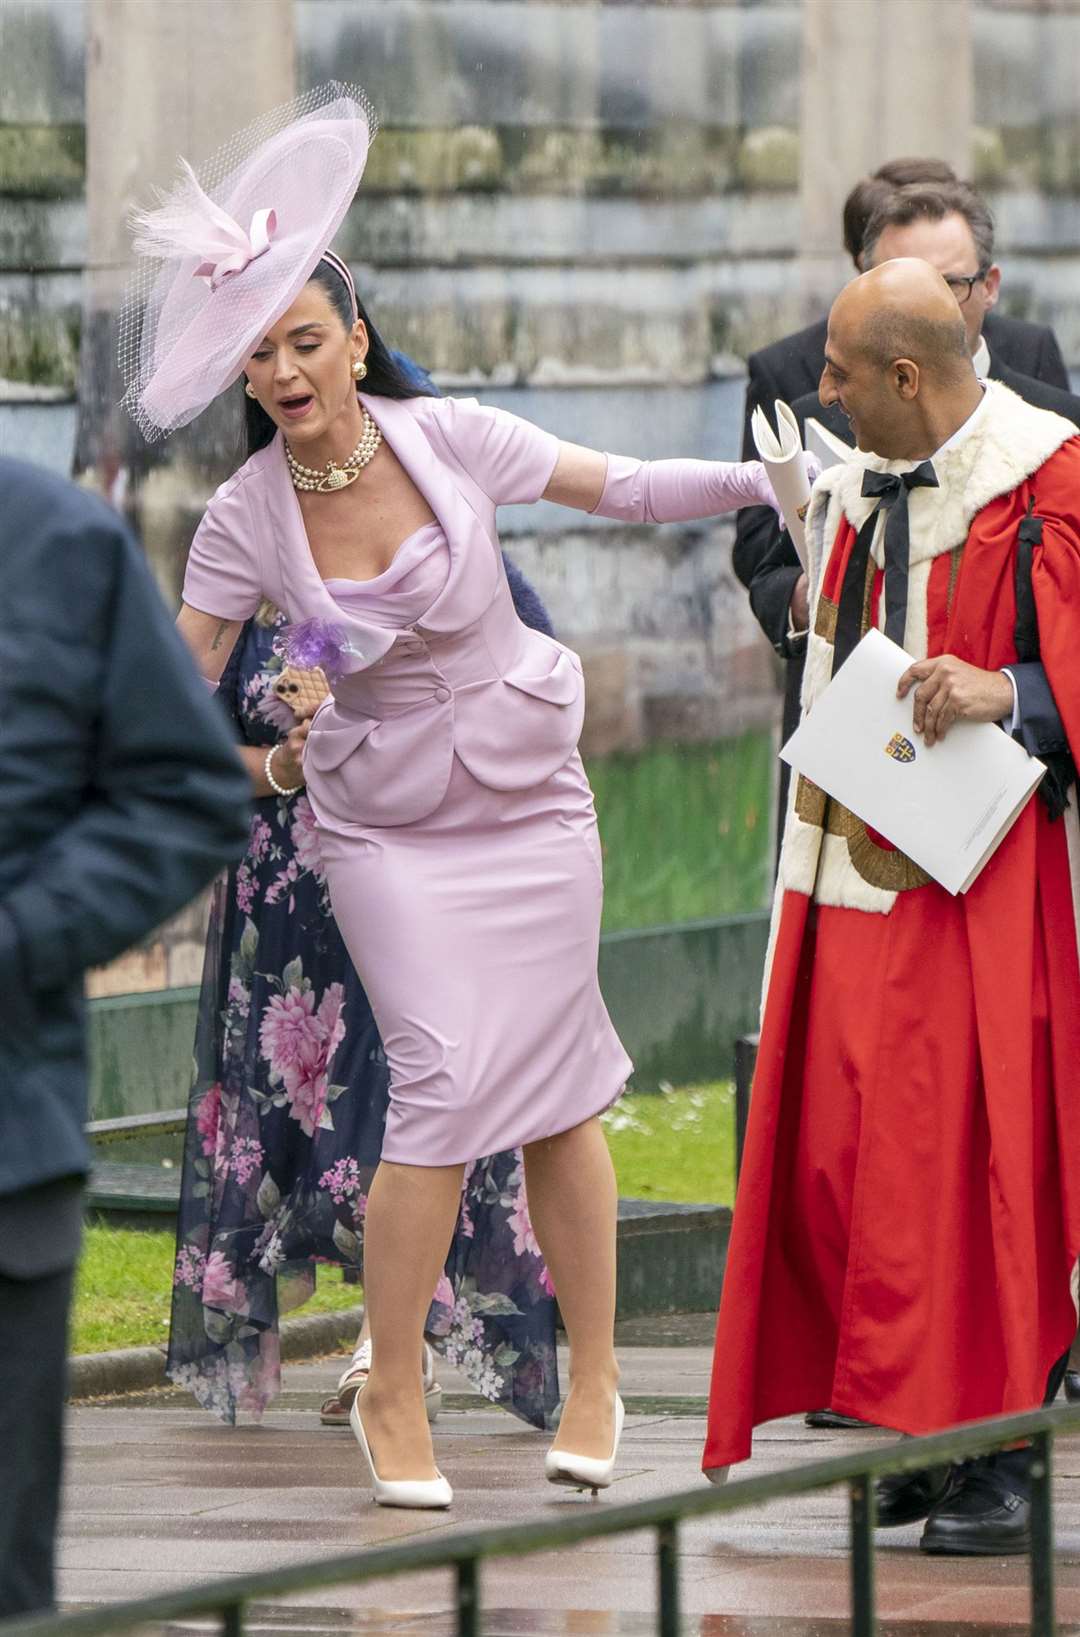 Katy Perry leaves Westminster Abbey following the coronation ceremony (Jane Barlow/PA)